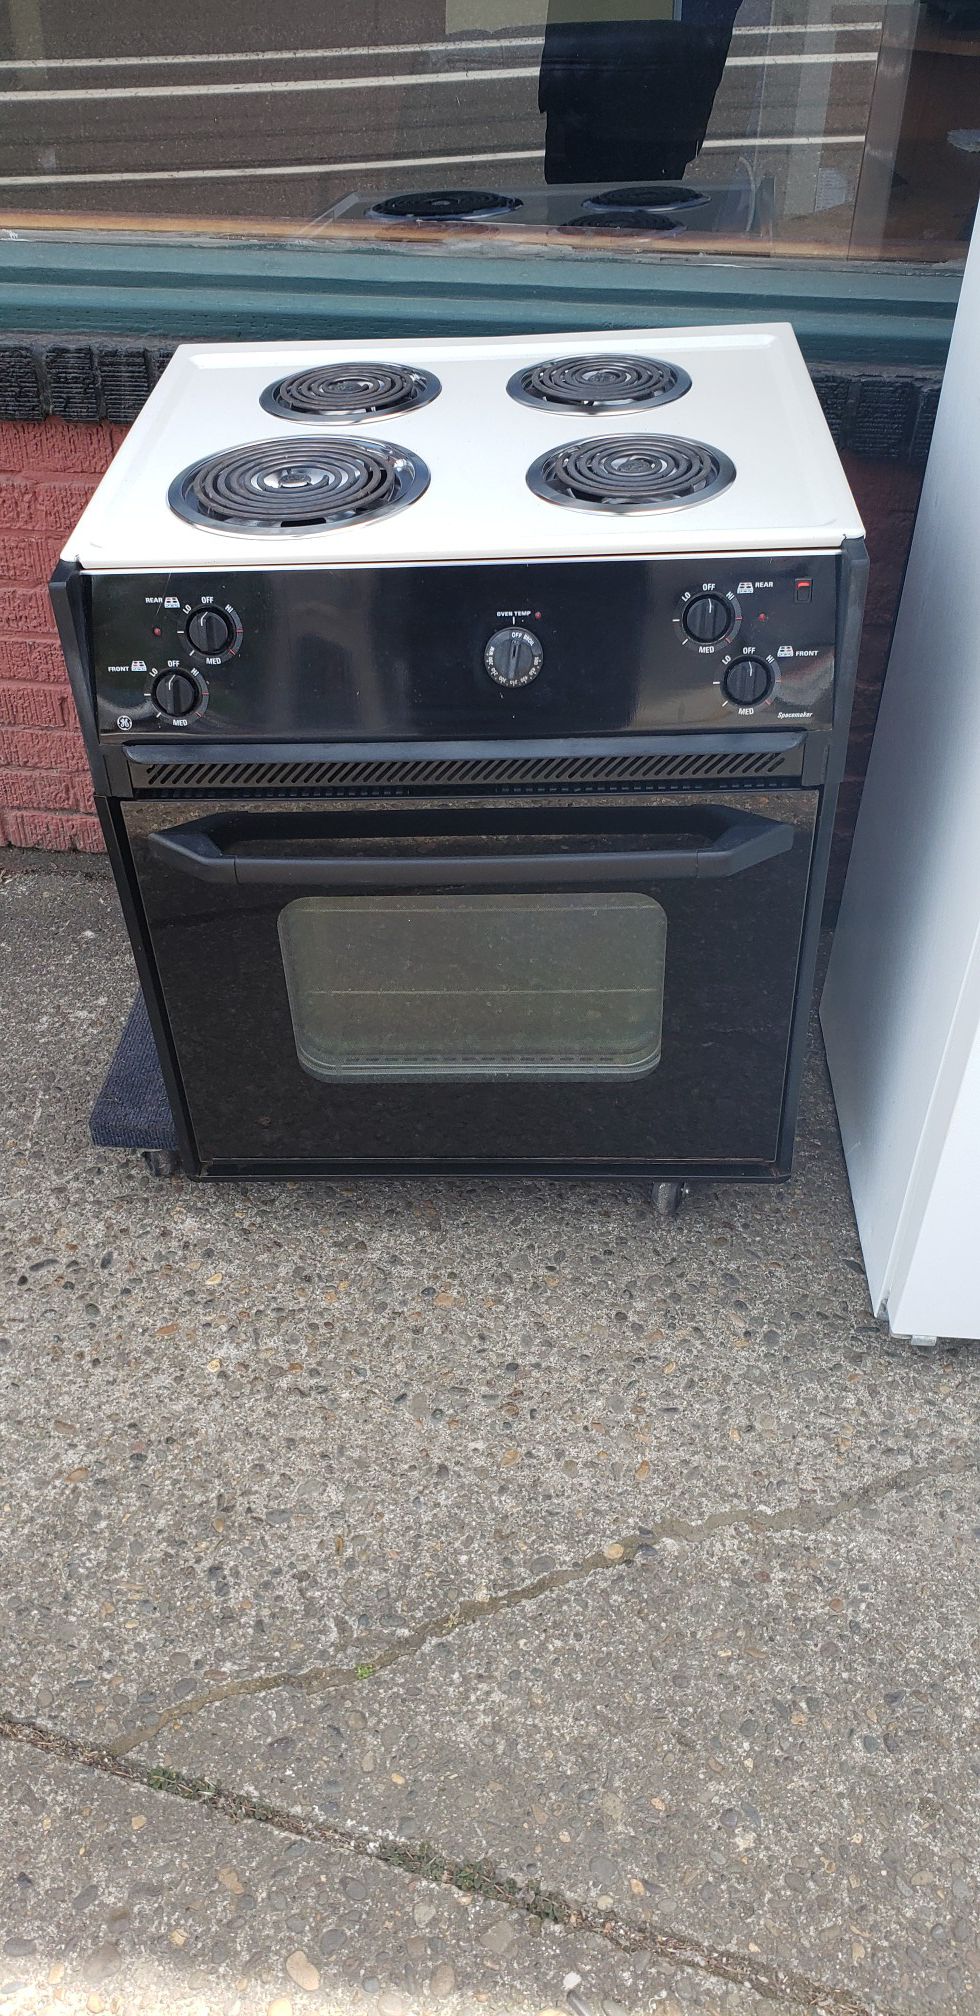 GE27 inch drop in electric range Coil burners are 3 small 1 large manual clean oven